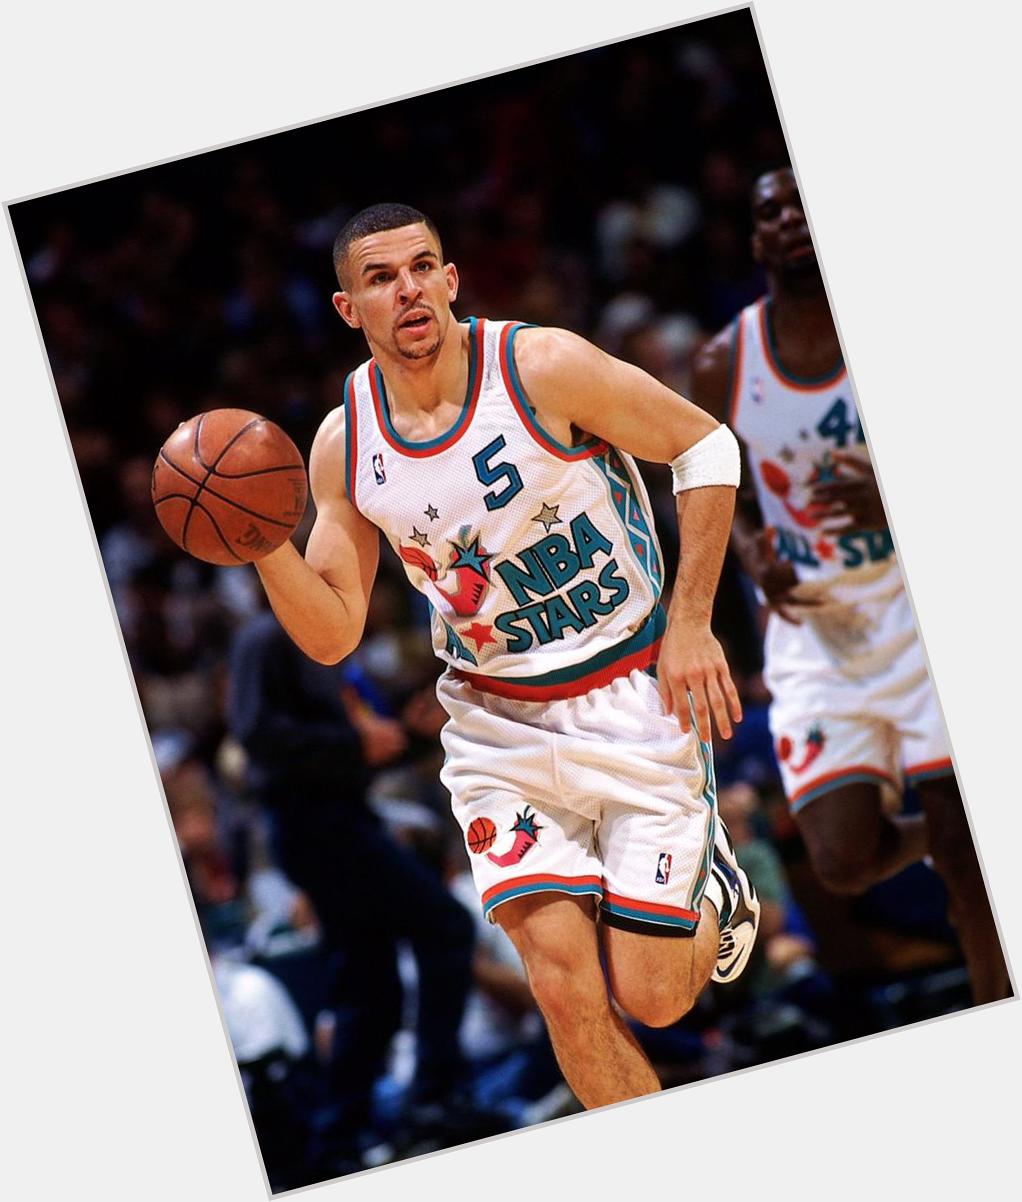 Happy Birthday to one of my favorite point guards of all time, Jason Kidd. 